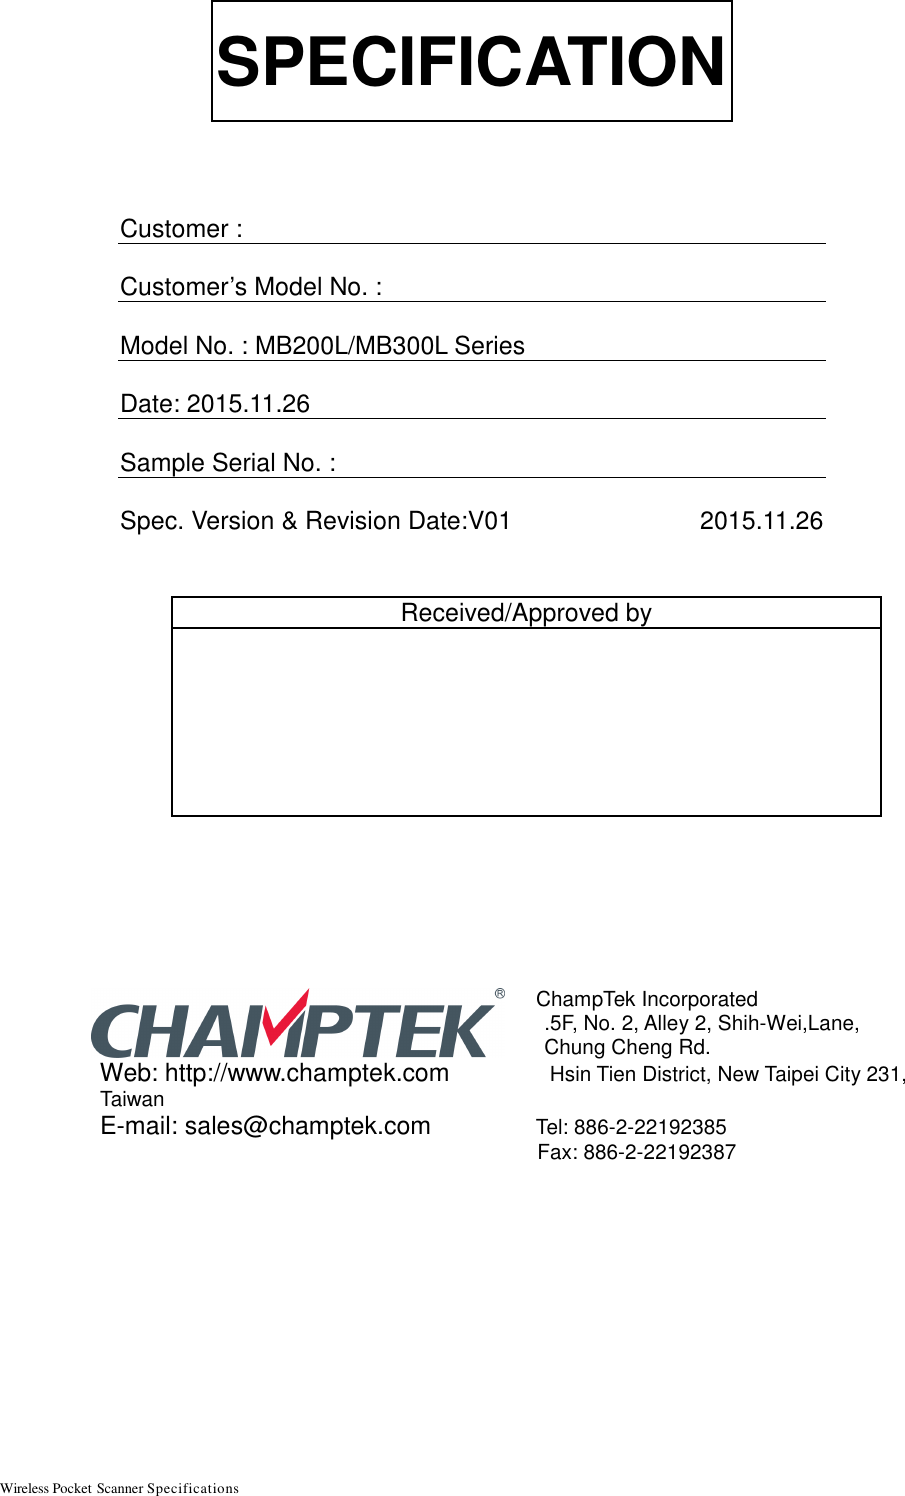 Wireless Pocket Scanner Specifications                                                         SPECIFICATION    Customer :  Customer’s Model No. :    Model No. : MB200L/MB300L Series  Date: 2015.11.26  Sample Serial No. :   Spec. Version &amp; Revision Date:V01                           2015.11.26                   ChampTek Incorporated  .5F, No. 2, Alley 2, Shih-Wei,Lane,    Chung Cheng Rd. Web: http://www.champtek.com   Hsin Tien District, New Taipei City 231, Taiwan E-mail: sales@champtek.com   Tel: 886-2-22192385     Fax: 886-2-22192387     Received/Approved by  